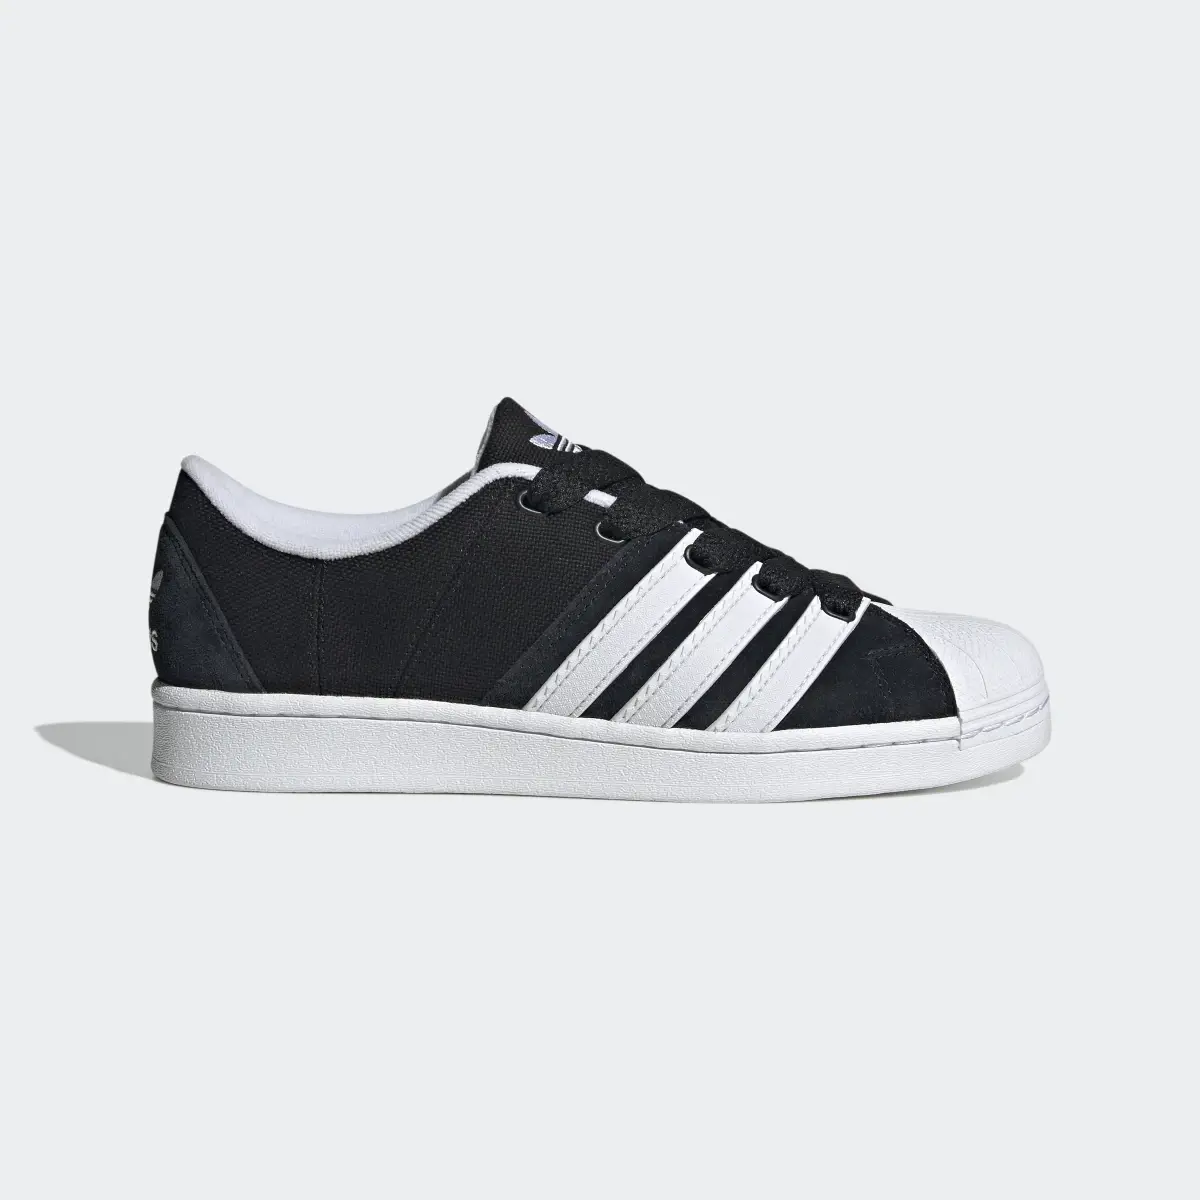 Adidas Superstar Supermodified Shoes. 2